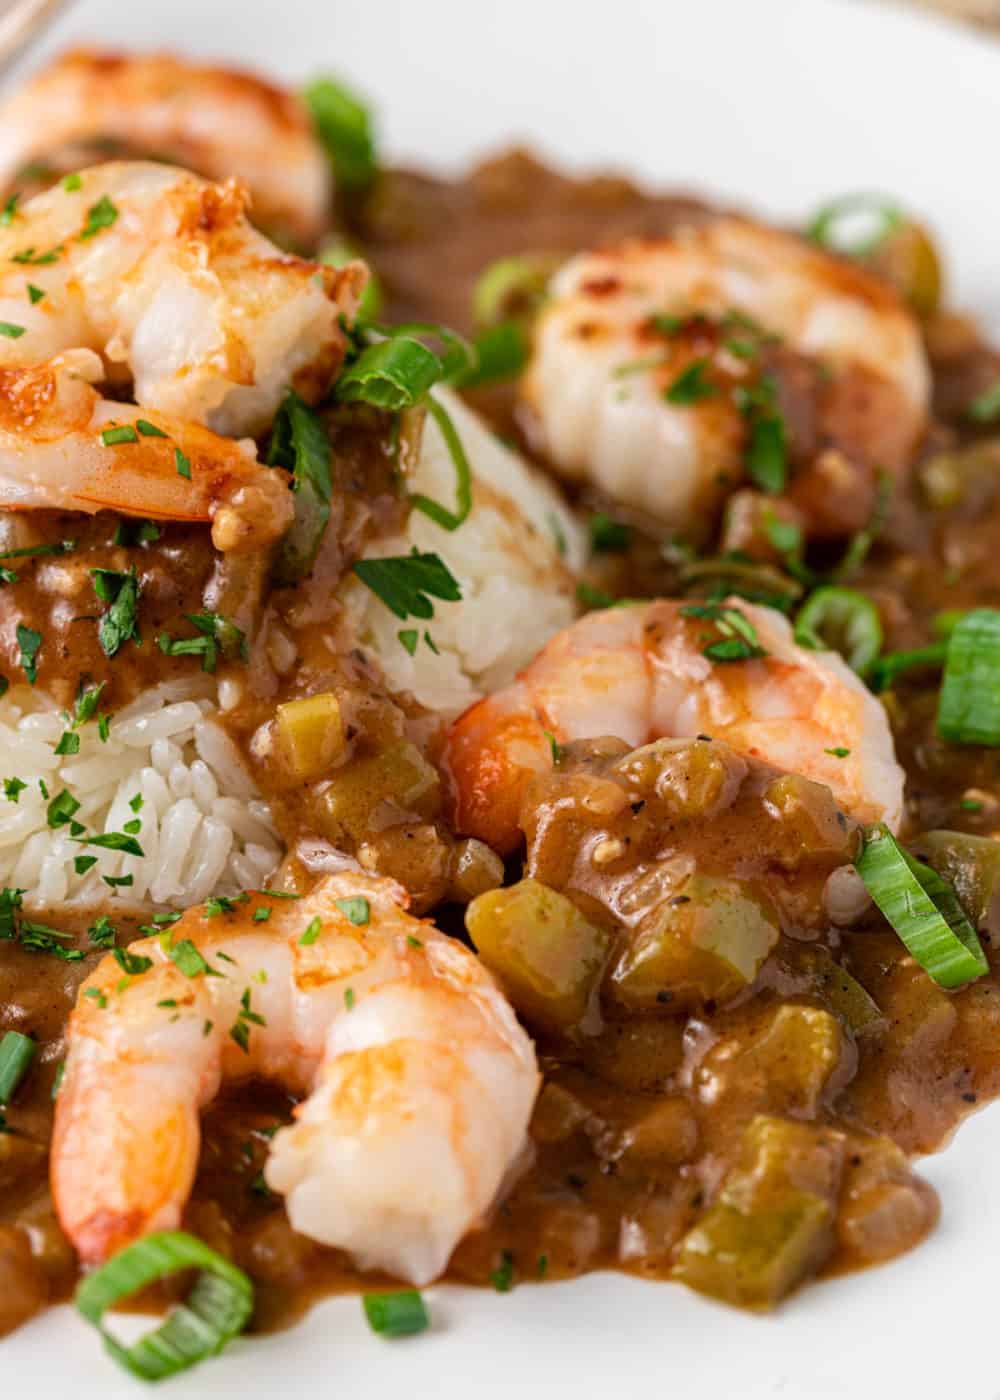 closeup: plump pieces of sauteed shrimp in dark brown gravy with rice